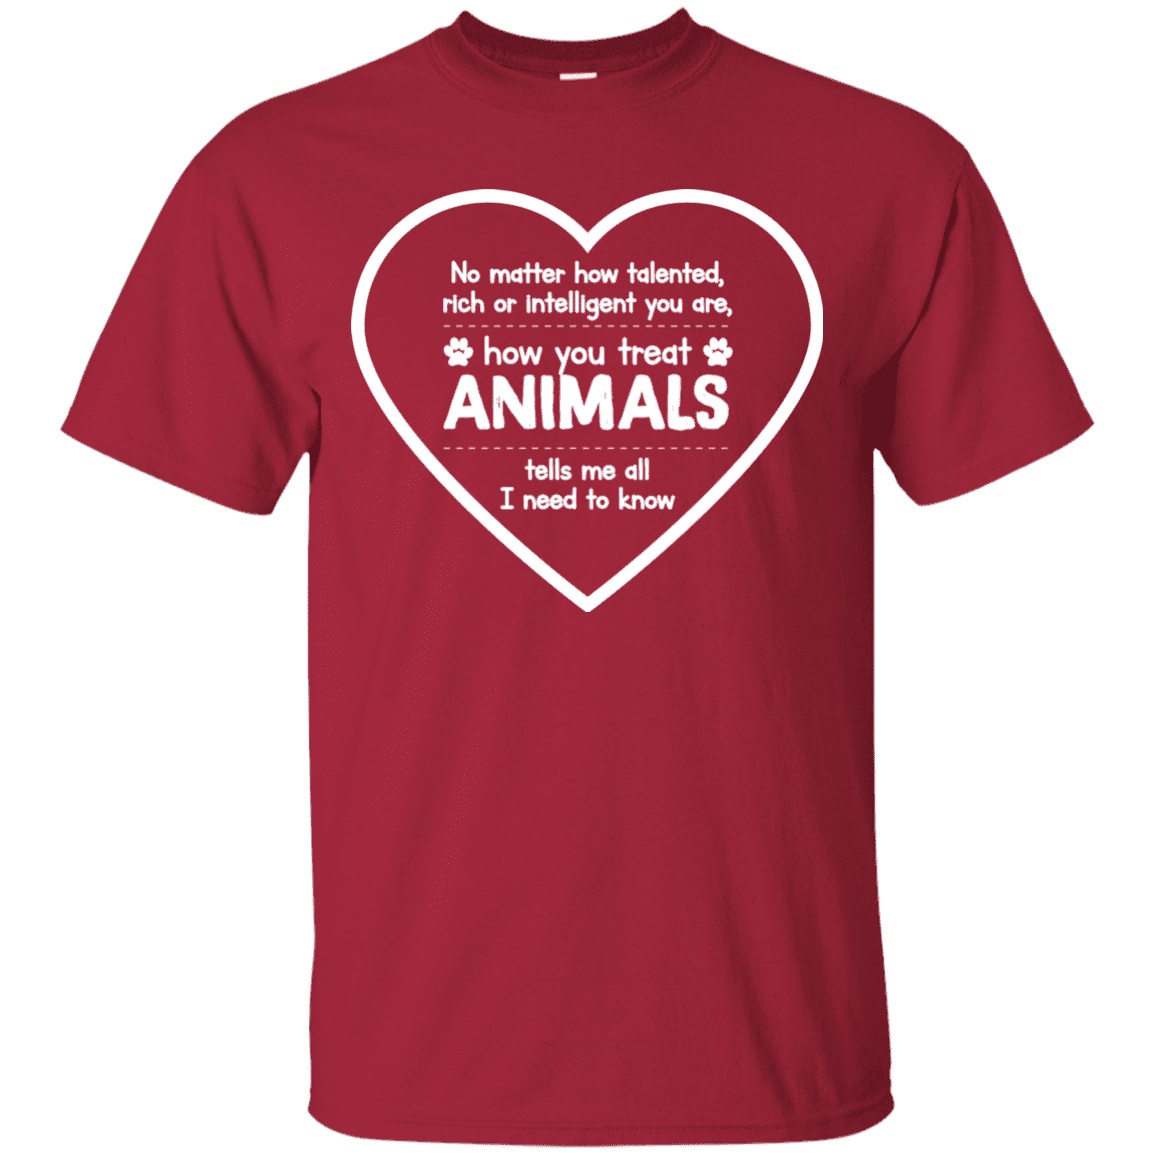 How You Treat Animals - T Shirt.